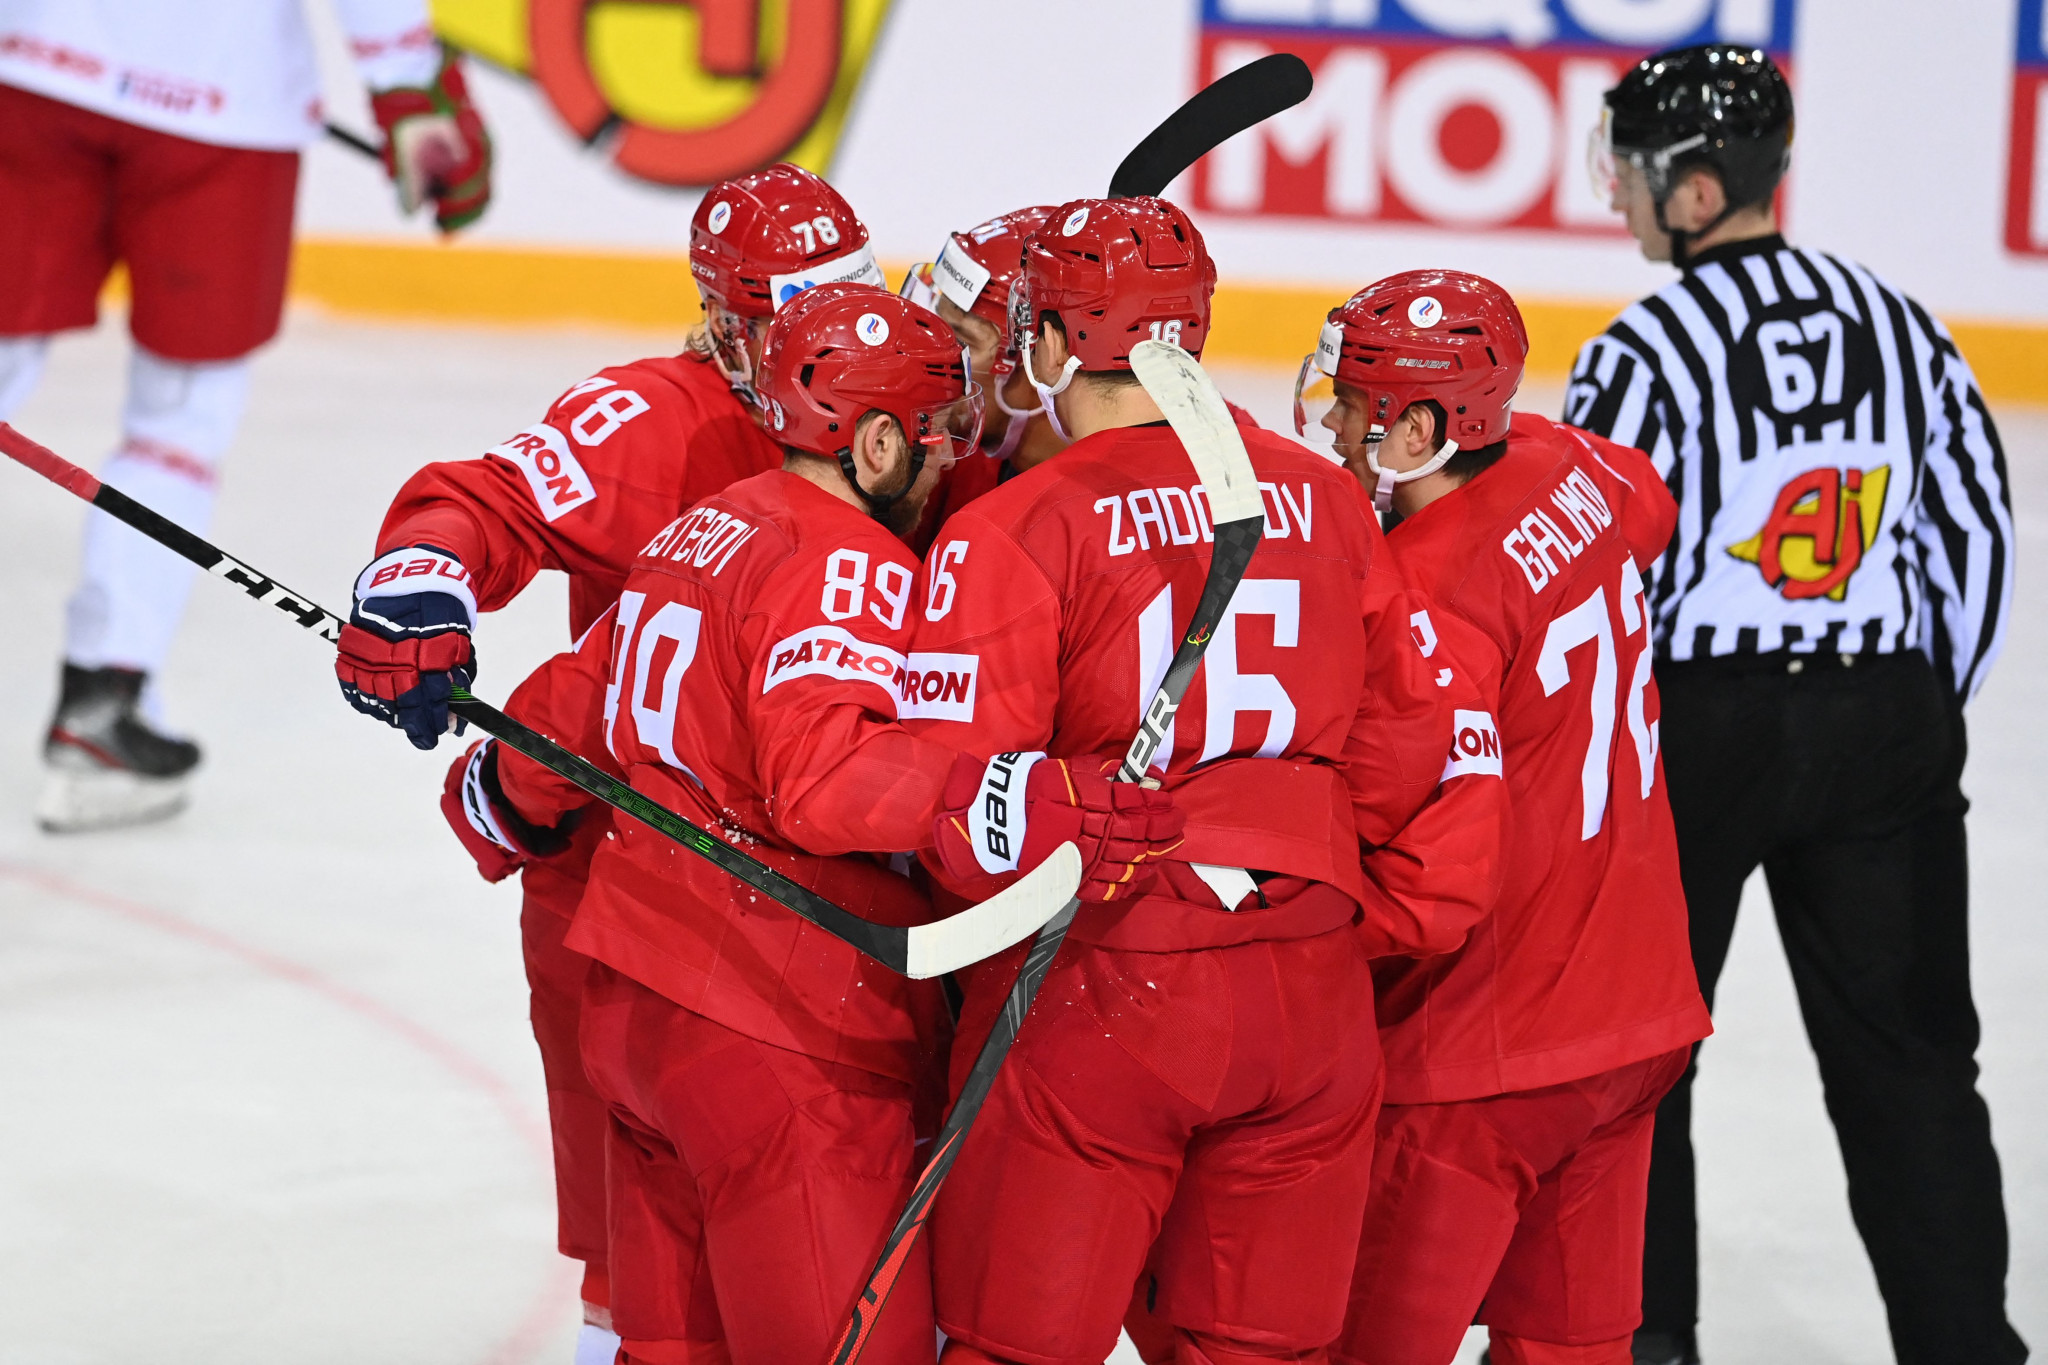 Russia, as well as Belarus, faces being banned from next year's IIHF World Championship ©Getty Images